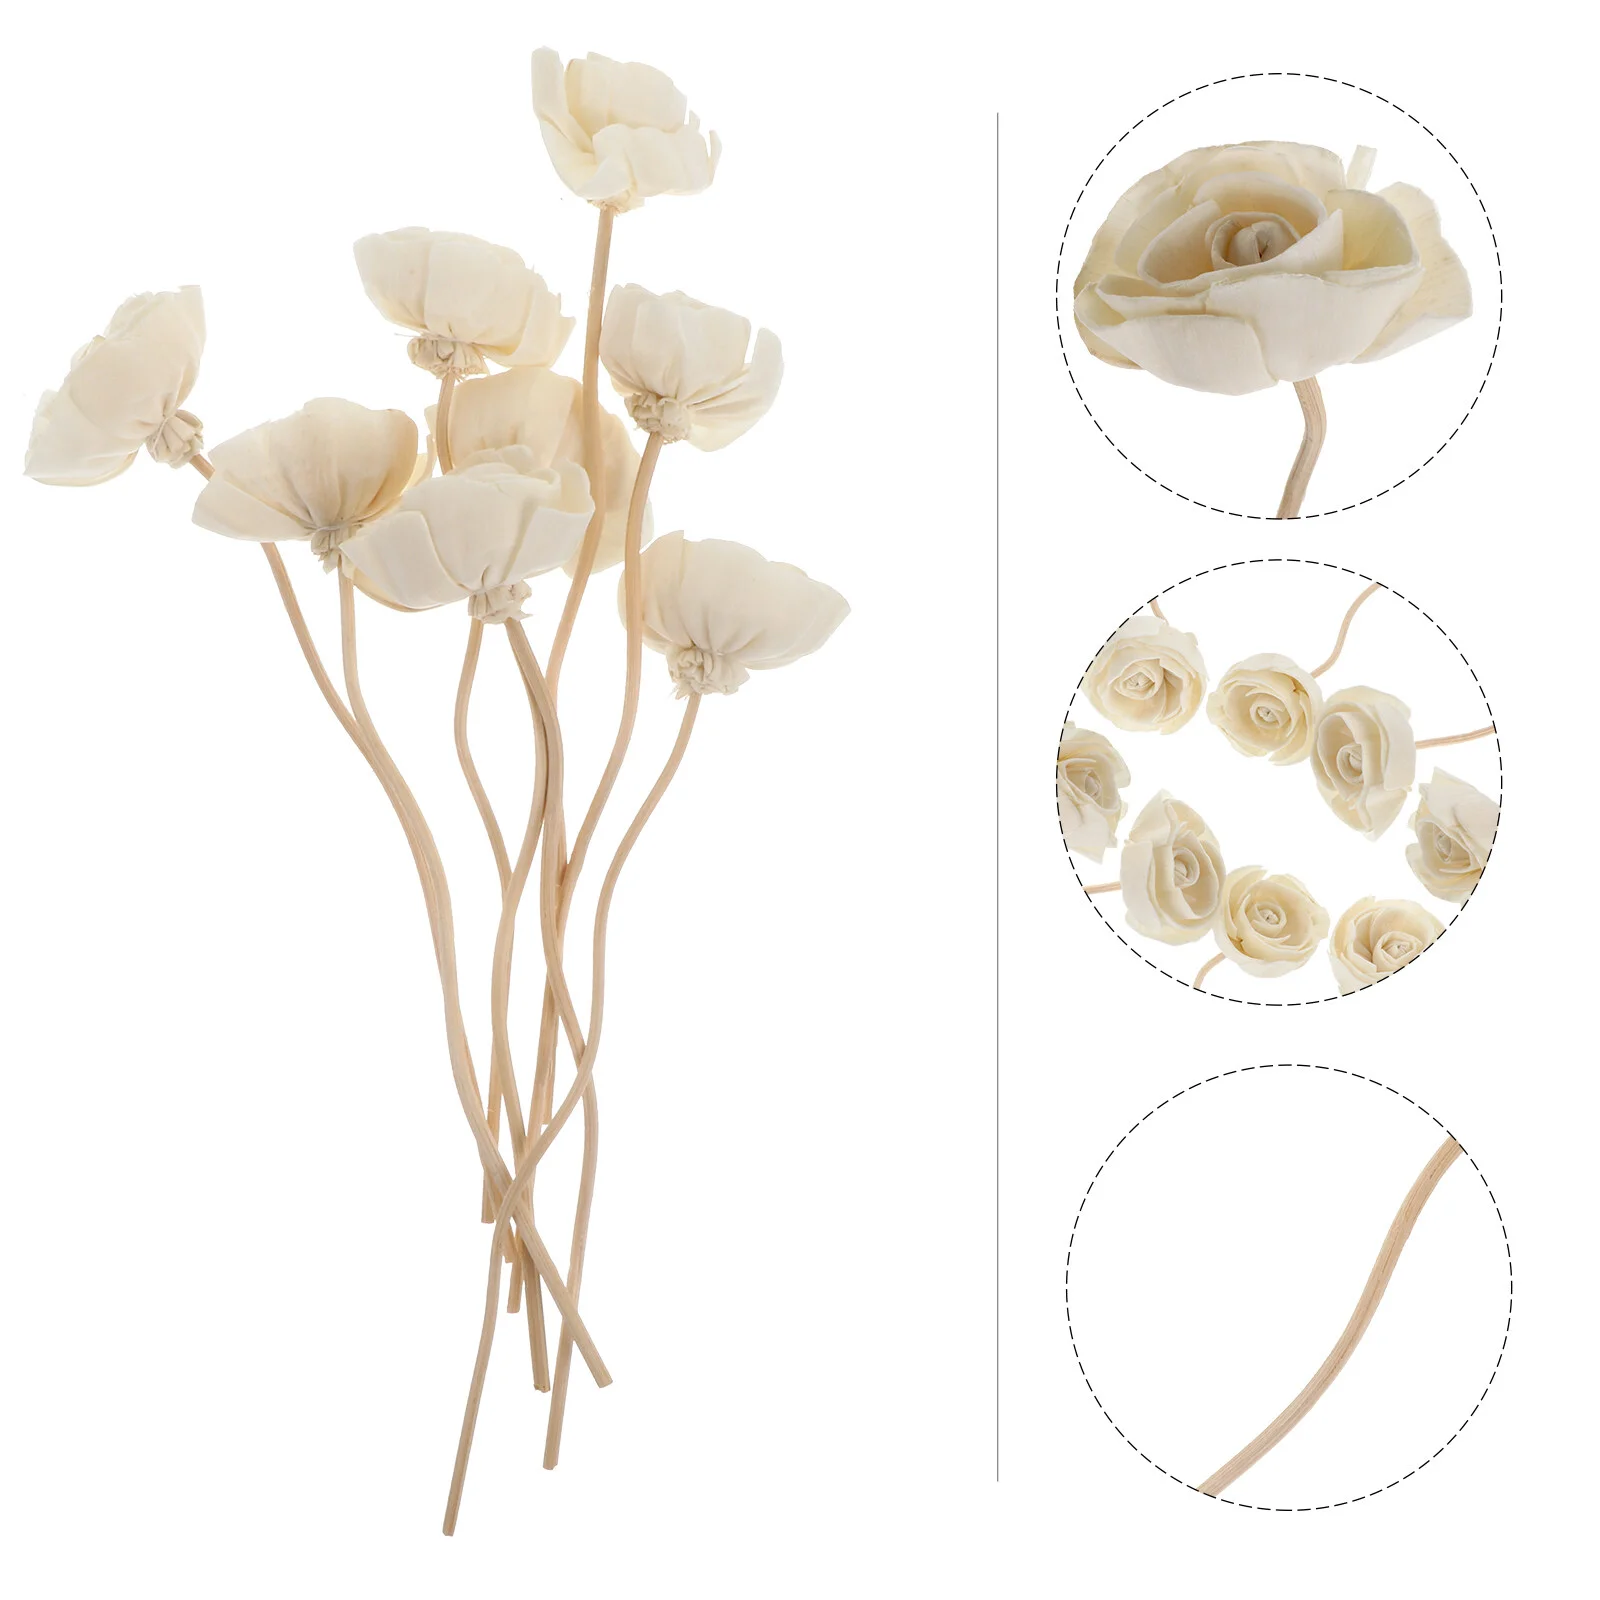 

8 Pcs Tong Grass Flower Aroma Diffuser Rattans Vine Sticks Fragrance Perfume Reed Aromatherapy Vines Bride Home Scent